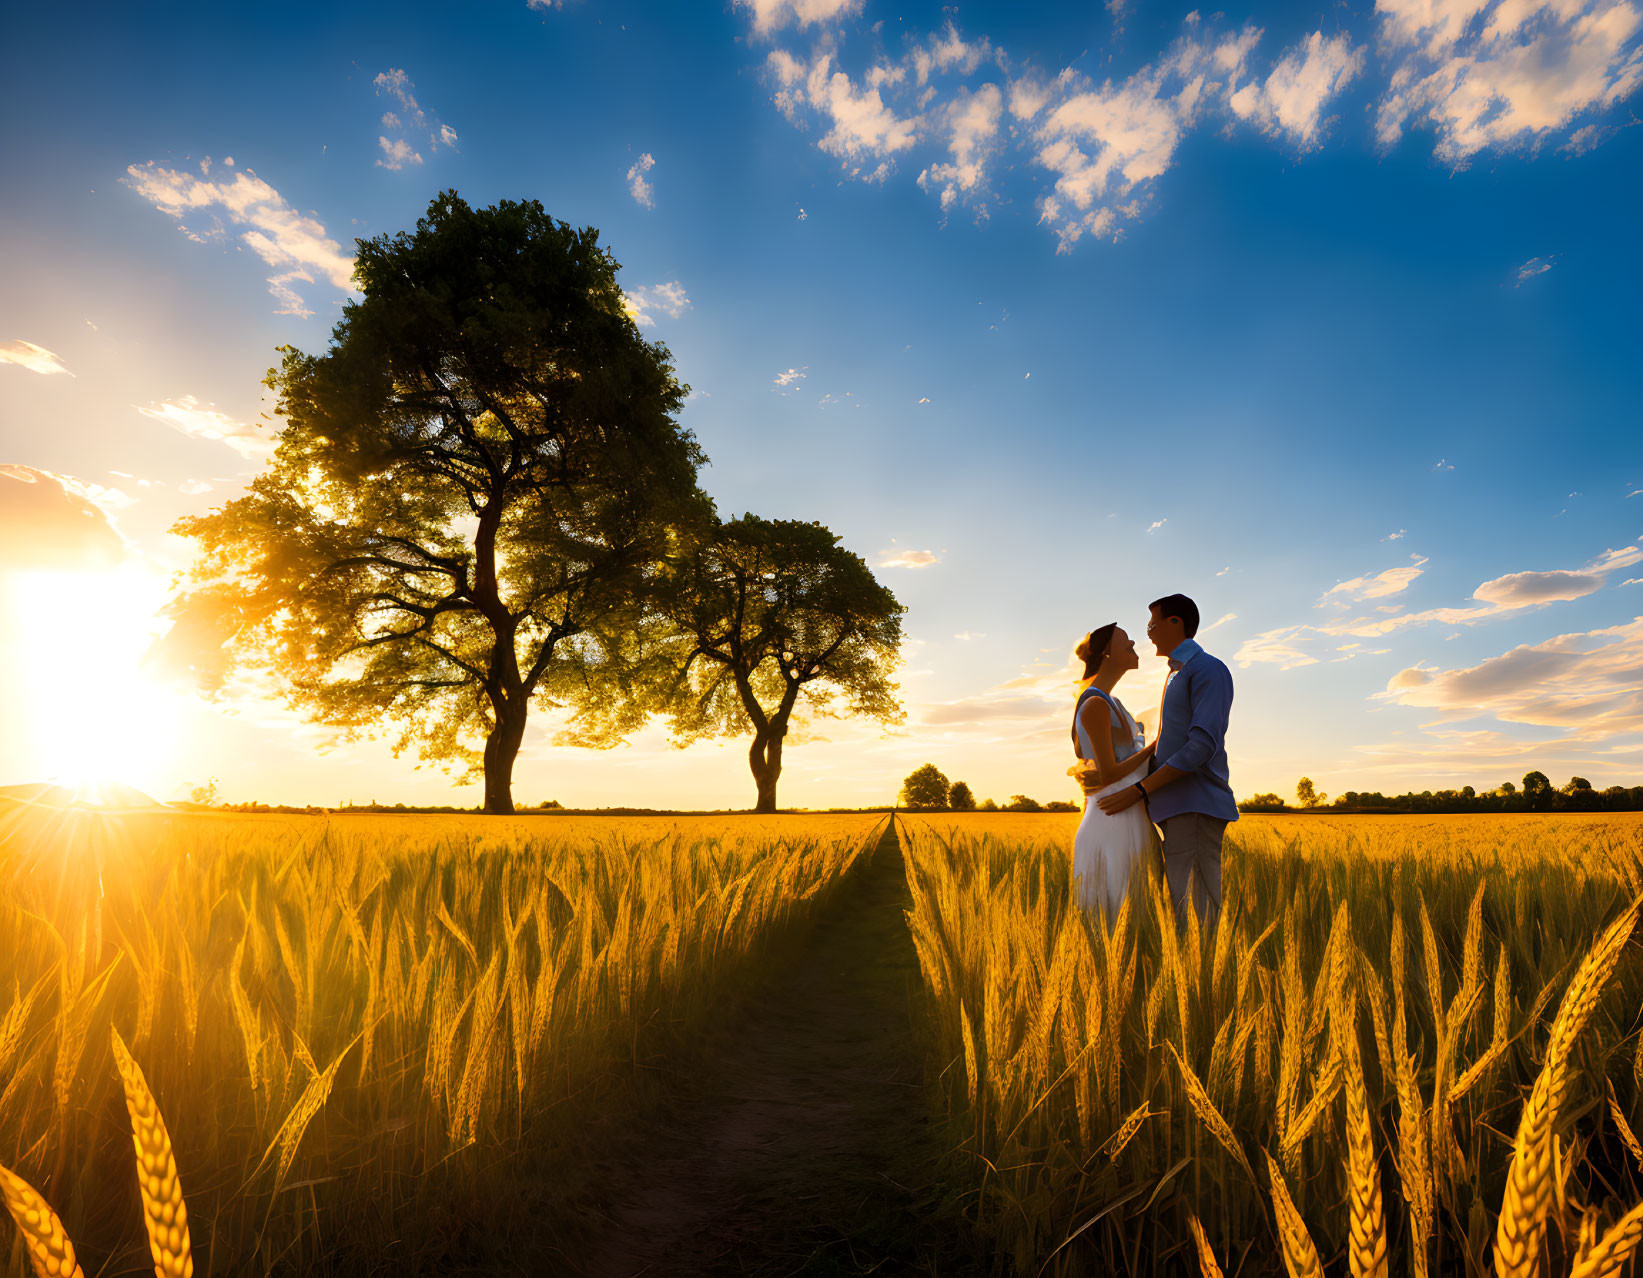 Couple in Golden Wheat Field at Sunset with Trees and Blue Sky